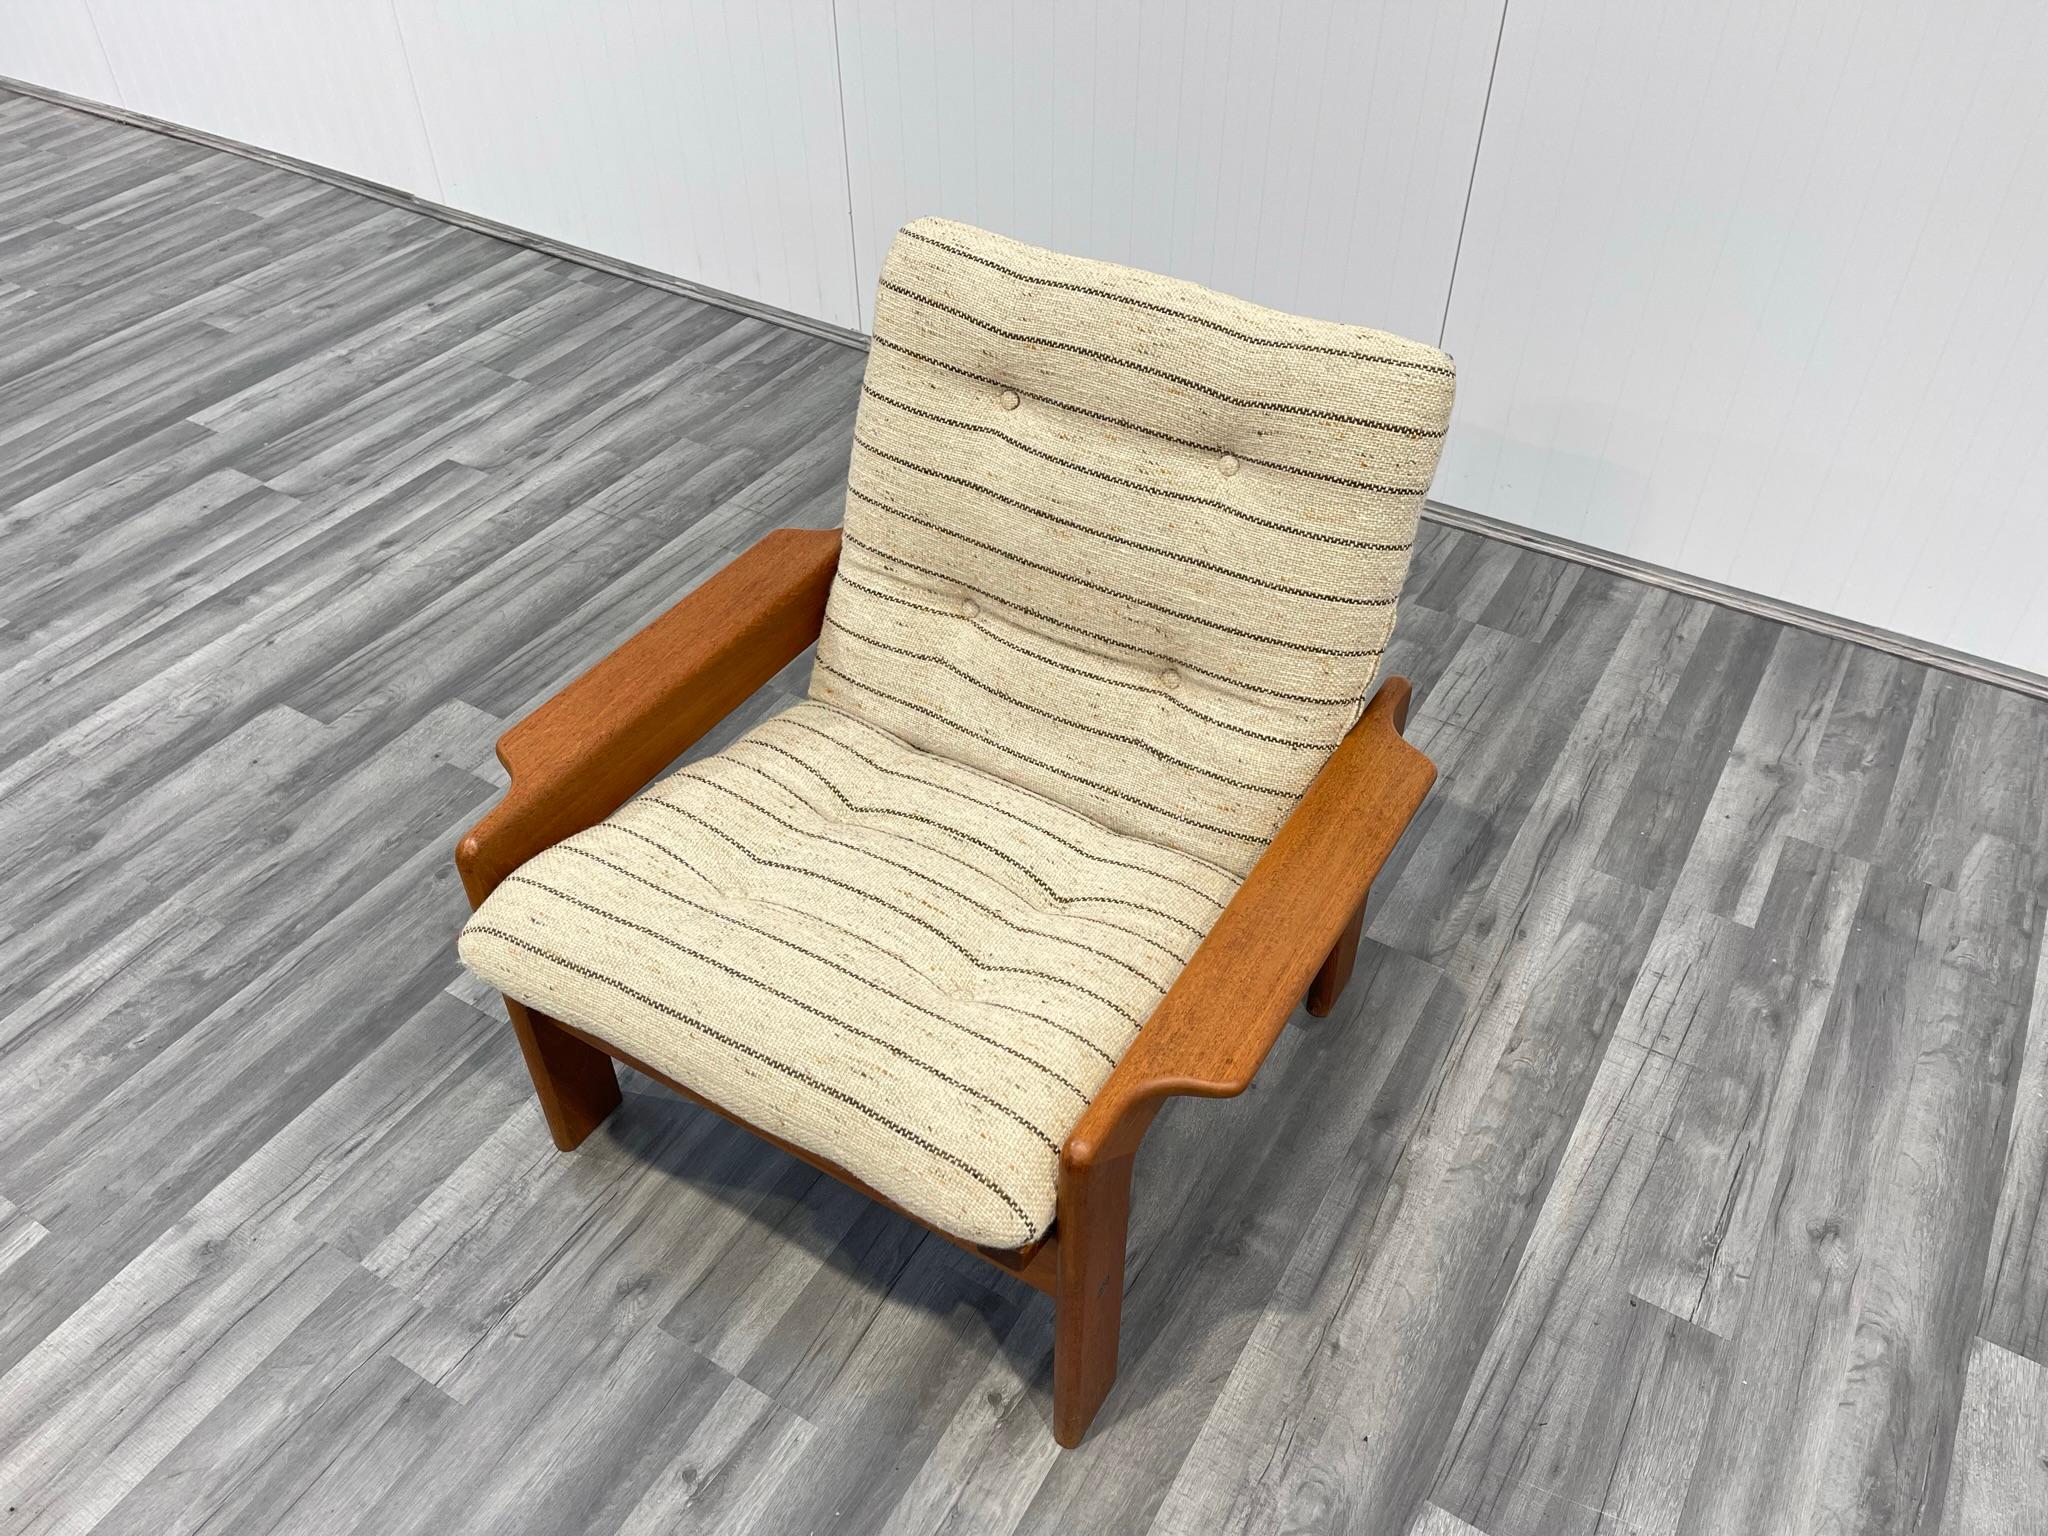 Manufactured in Denmark, this is a super stylish lounge chair in solid teak. Beautiful lines to this piece. When viewed in profile, we see a ‘triangular’ seat upon a squared frame. Look out too for the wonderfully formed armrests. Perfect for